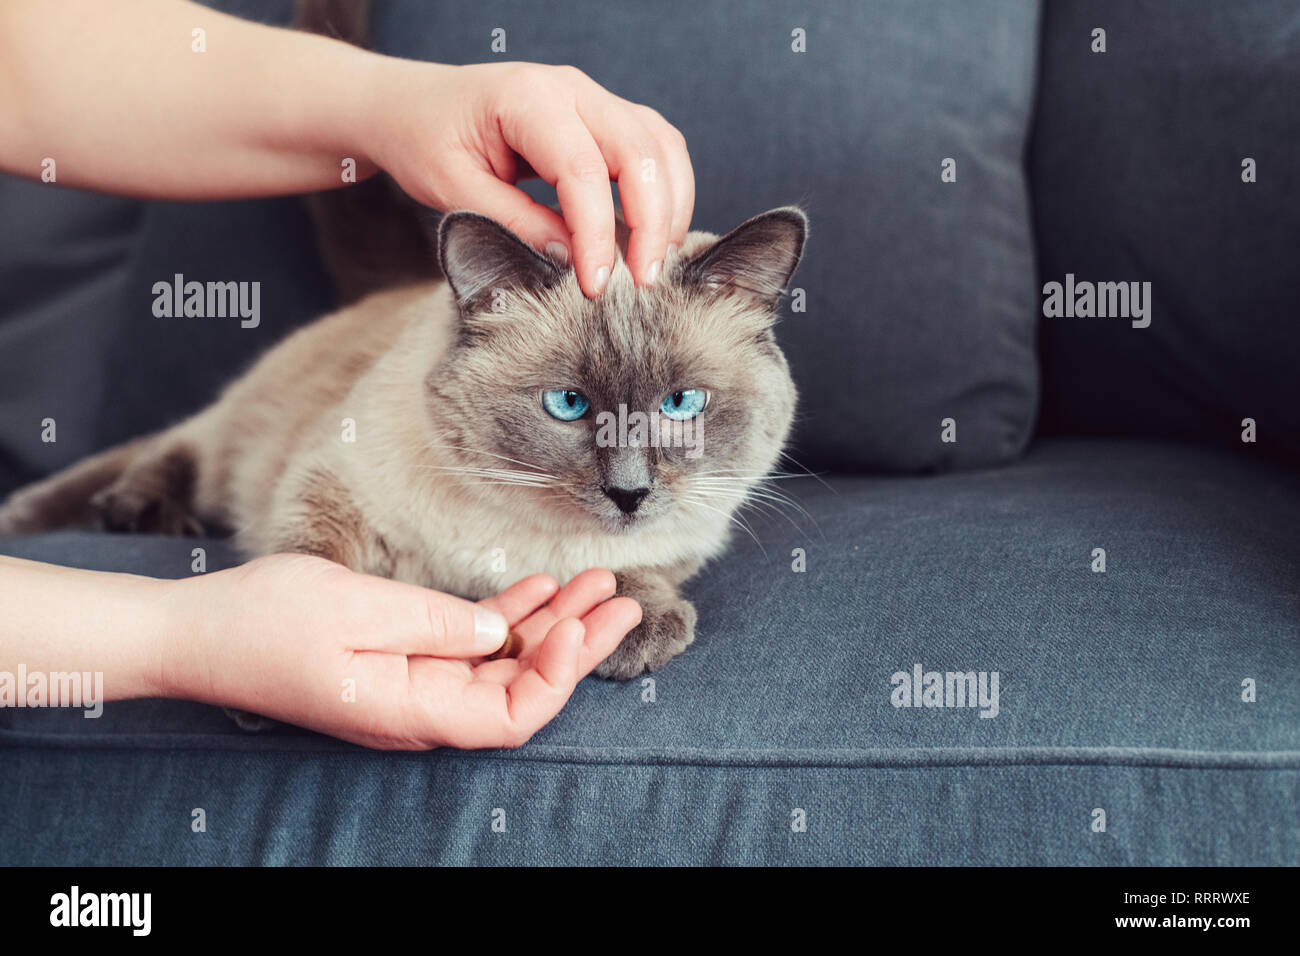 Animal owner feeding cat with dry food granules from his hand palm. Beautiful colorpoint domestic feline animal kitten with blue eyes lying on couch s Stock Photo